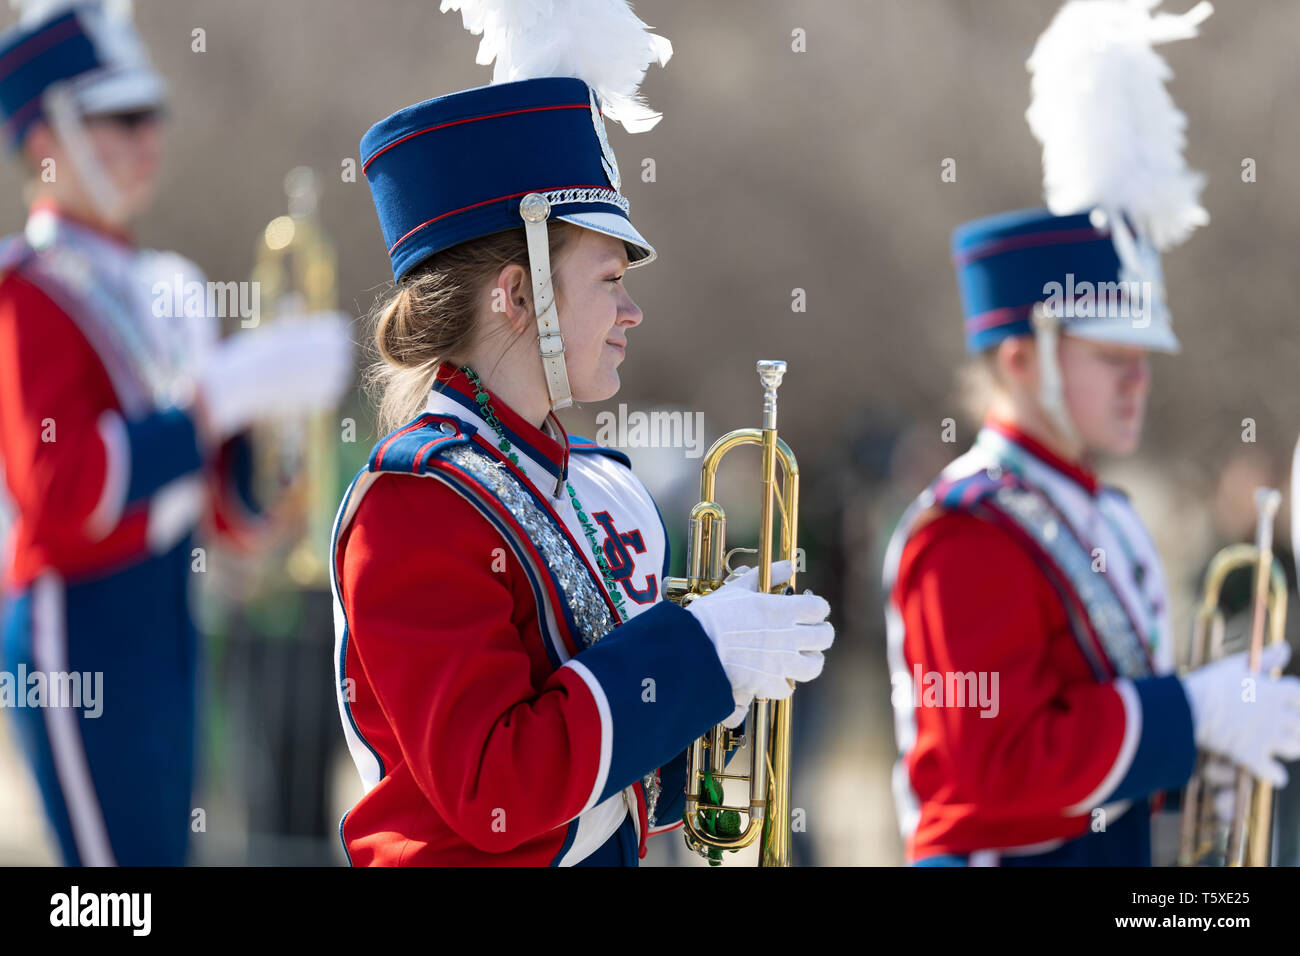 Chicago, Illinois, USA - March 16, 2019: St. Patrick's Day Parade, The Jennings County High School Band, Marching Pride, going down Columbus drive at  Stock Photo